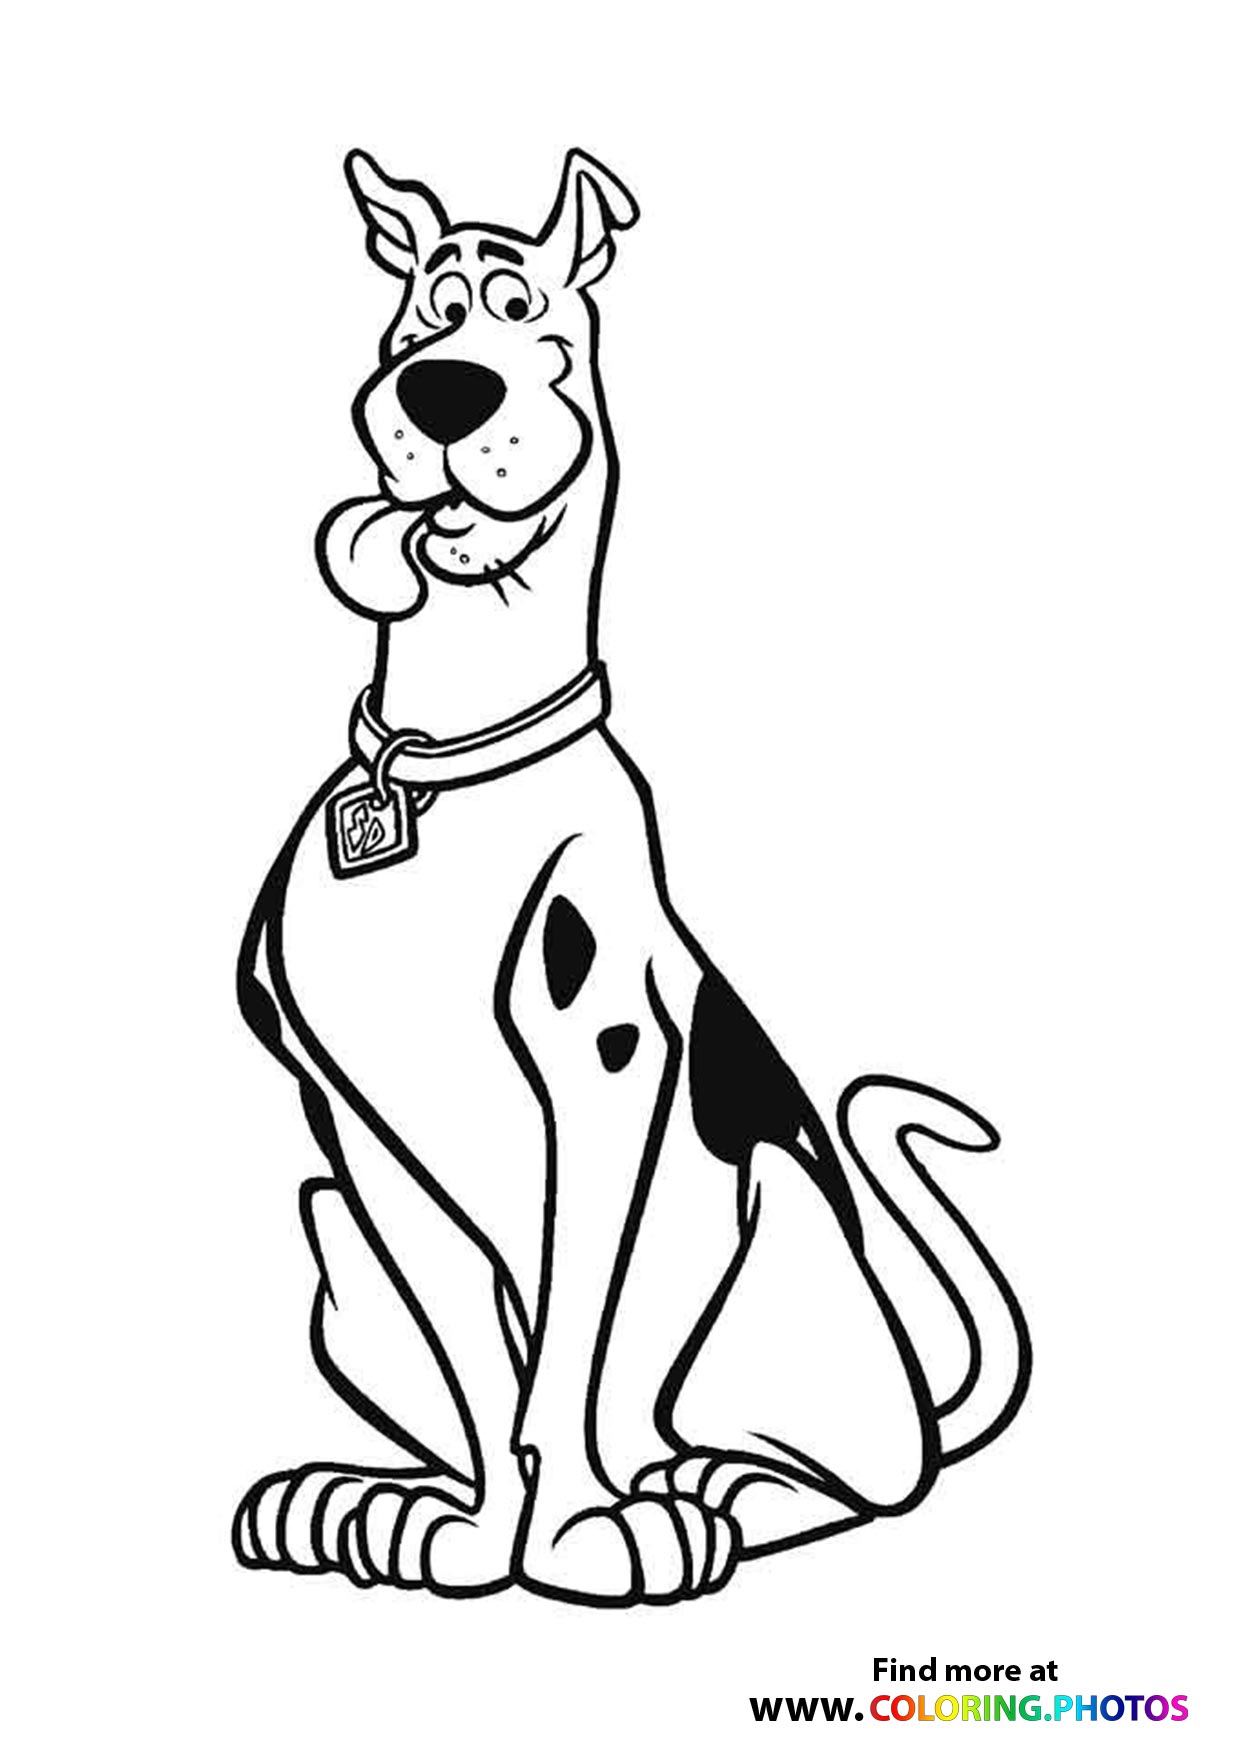 Scooby Doo Characters Coloring Pages Coloring Pages